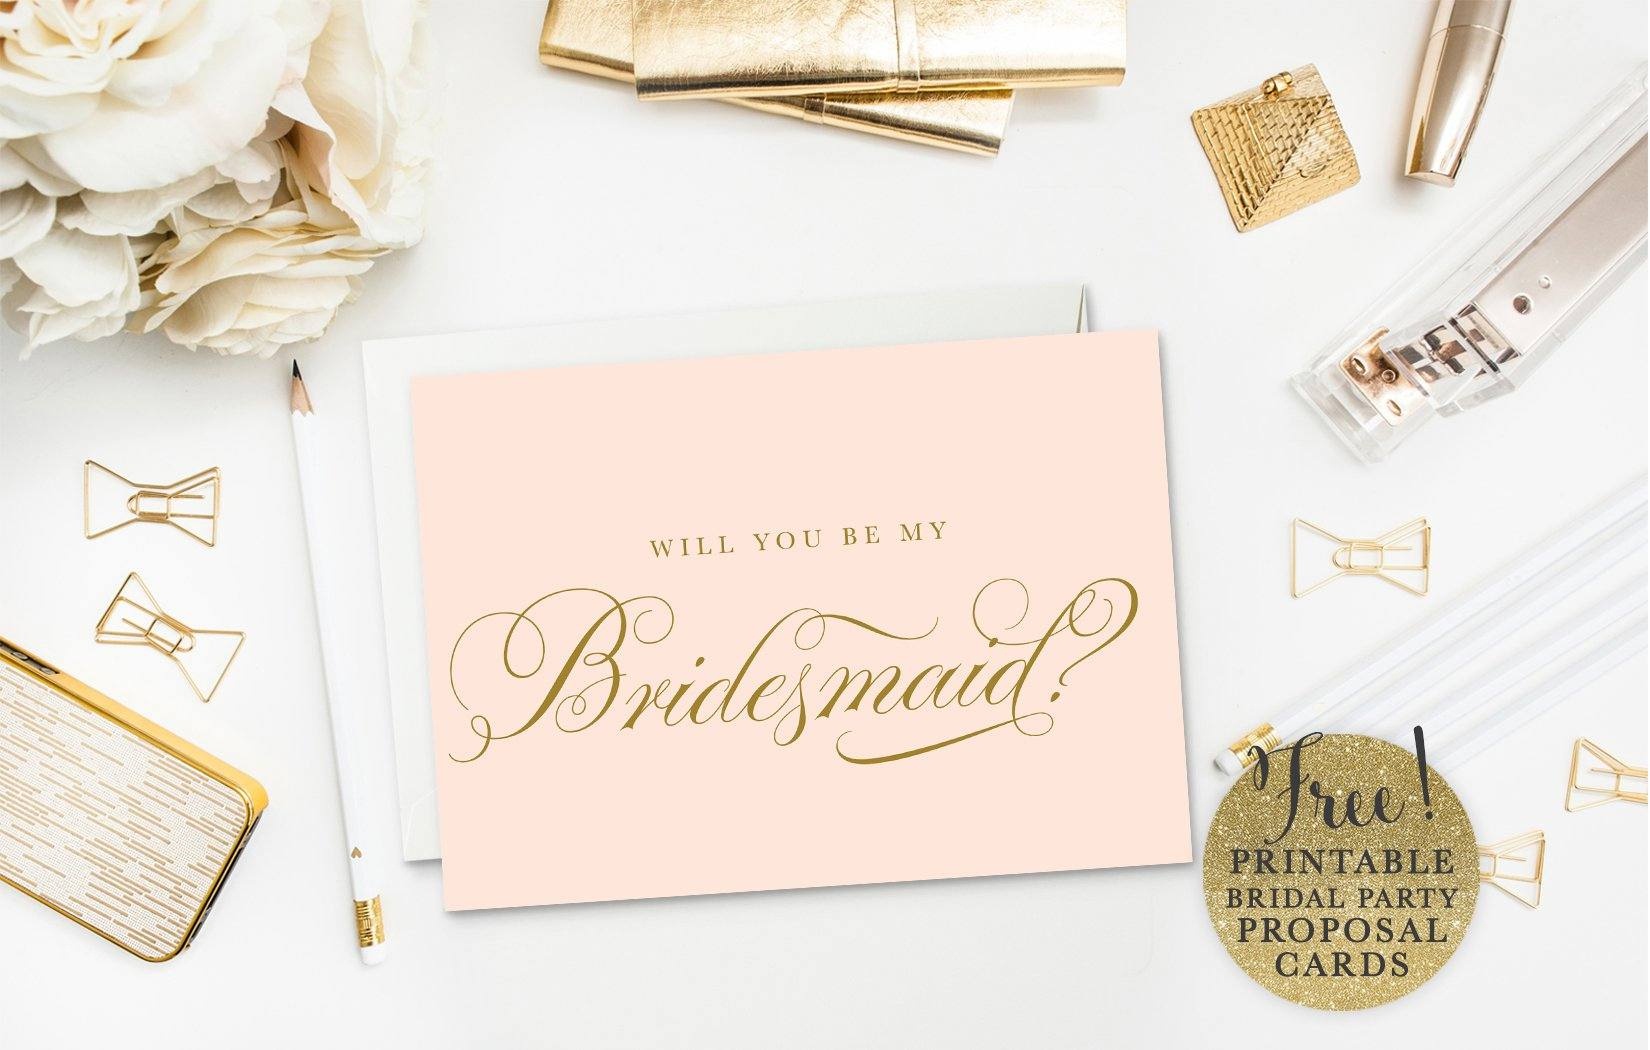 19 Free, Printable Will You Be My Bridesmaid? Cards - Free Printable Will You Be My Bridesmaid Cards